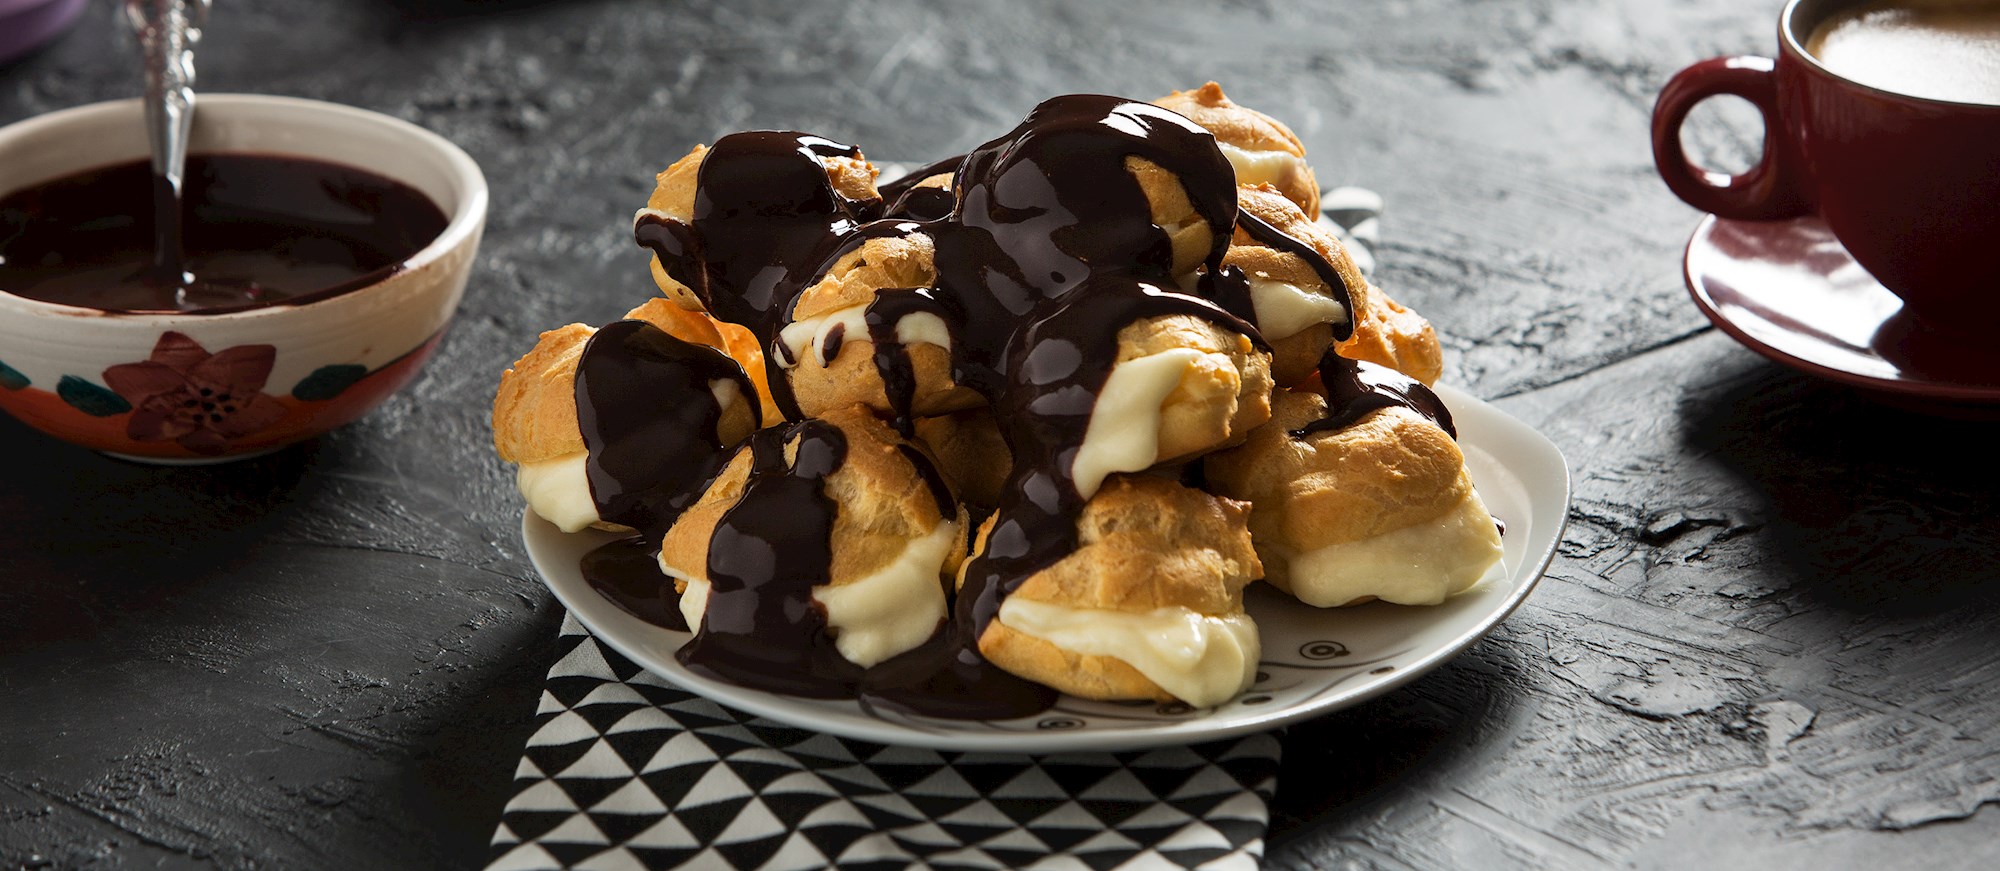 Where to Eat the Best Profiterole in the World? | TasteAtlas